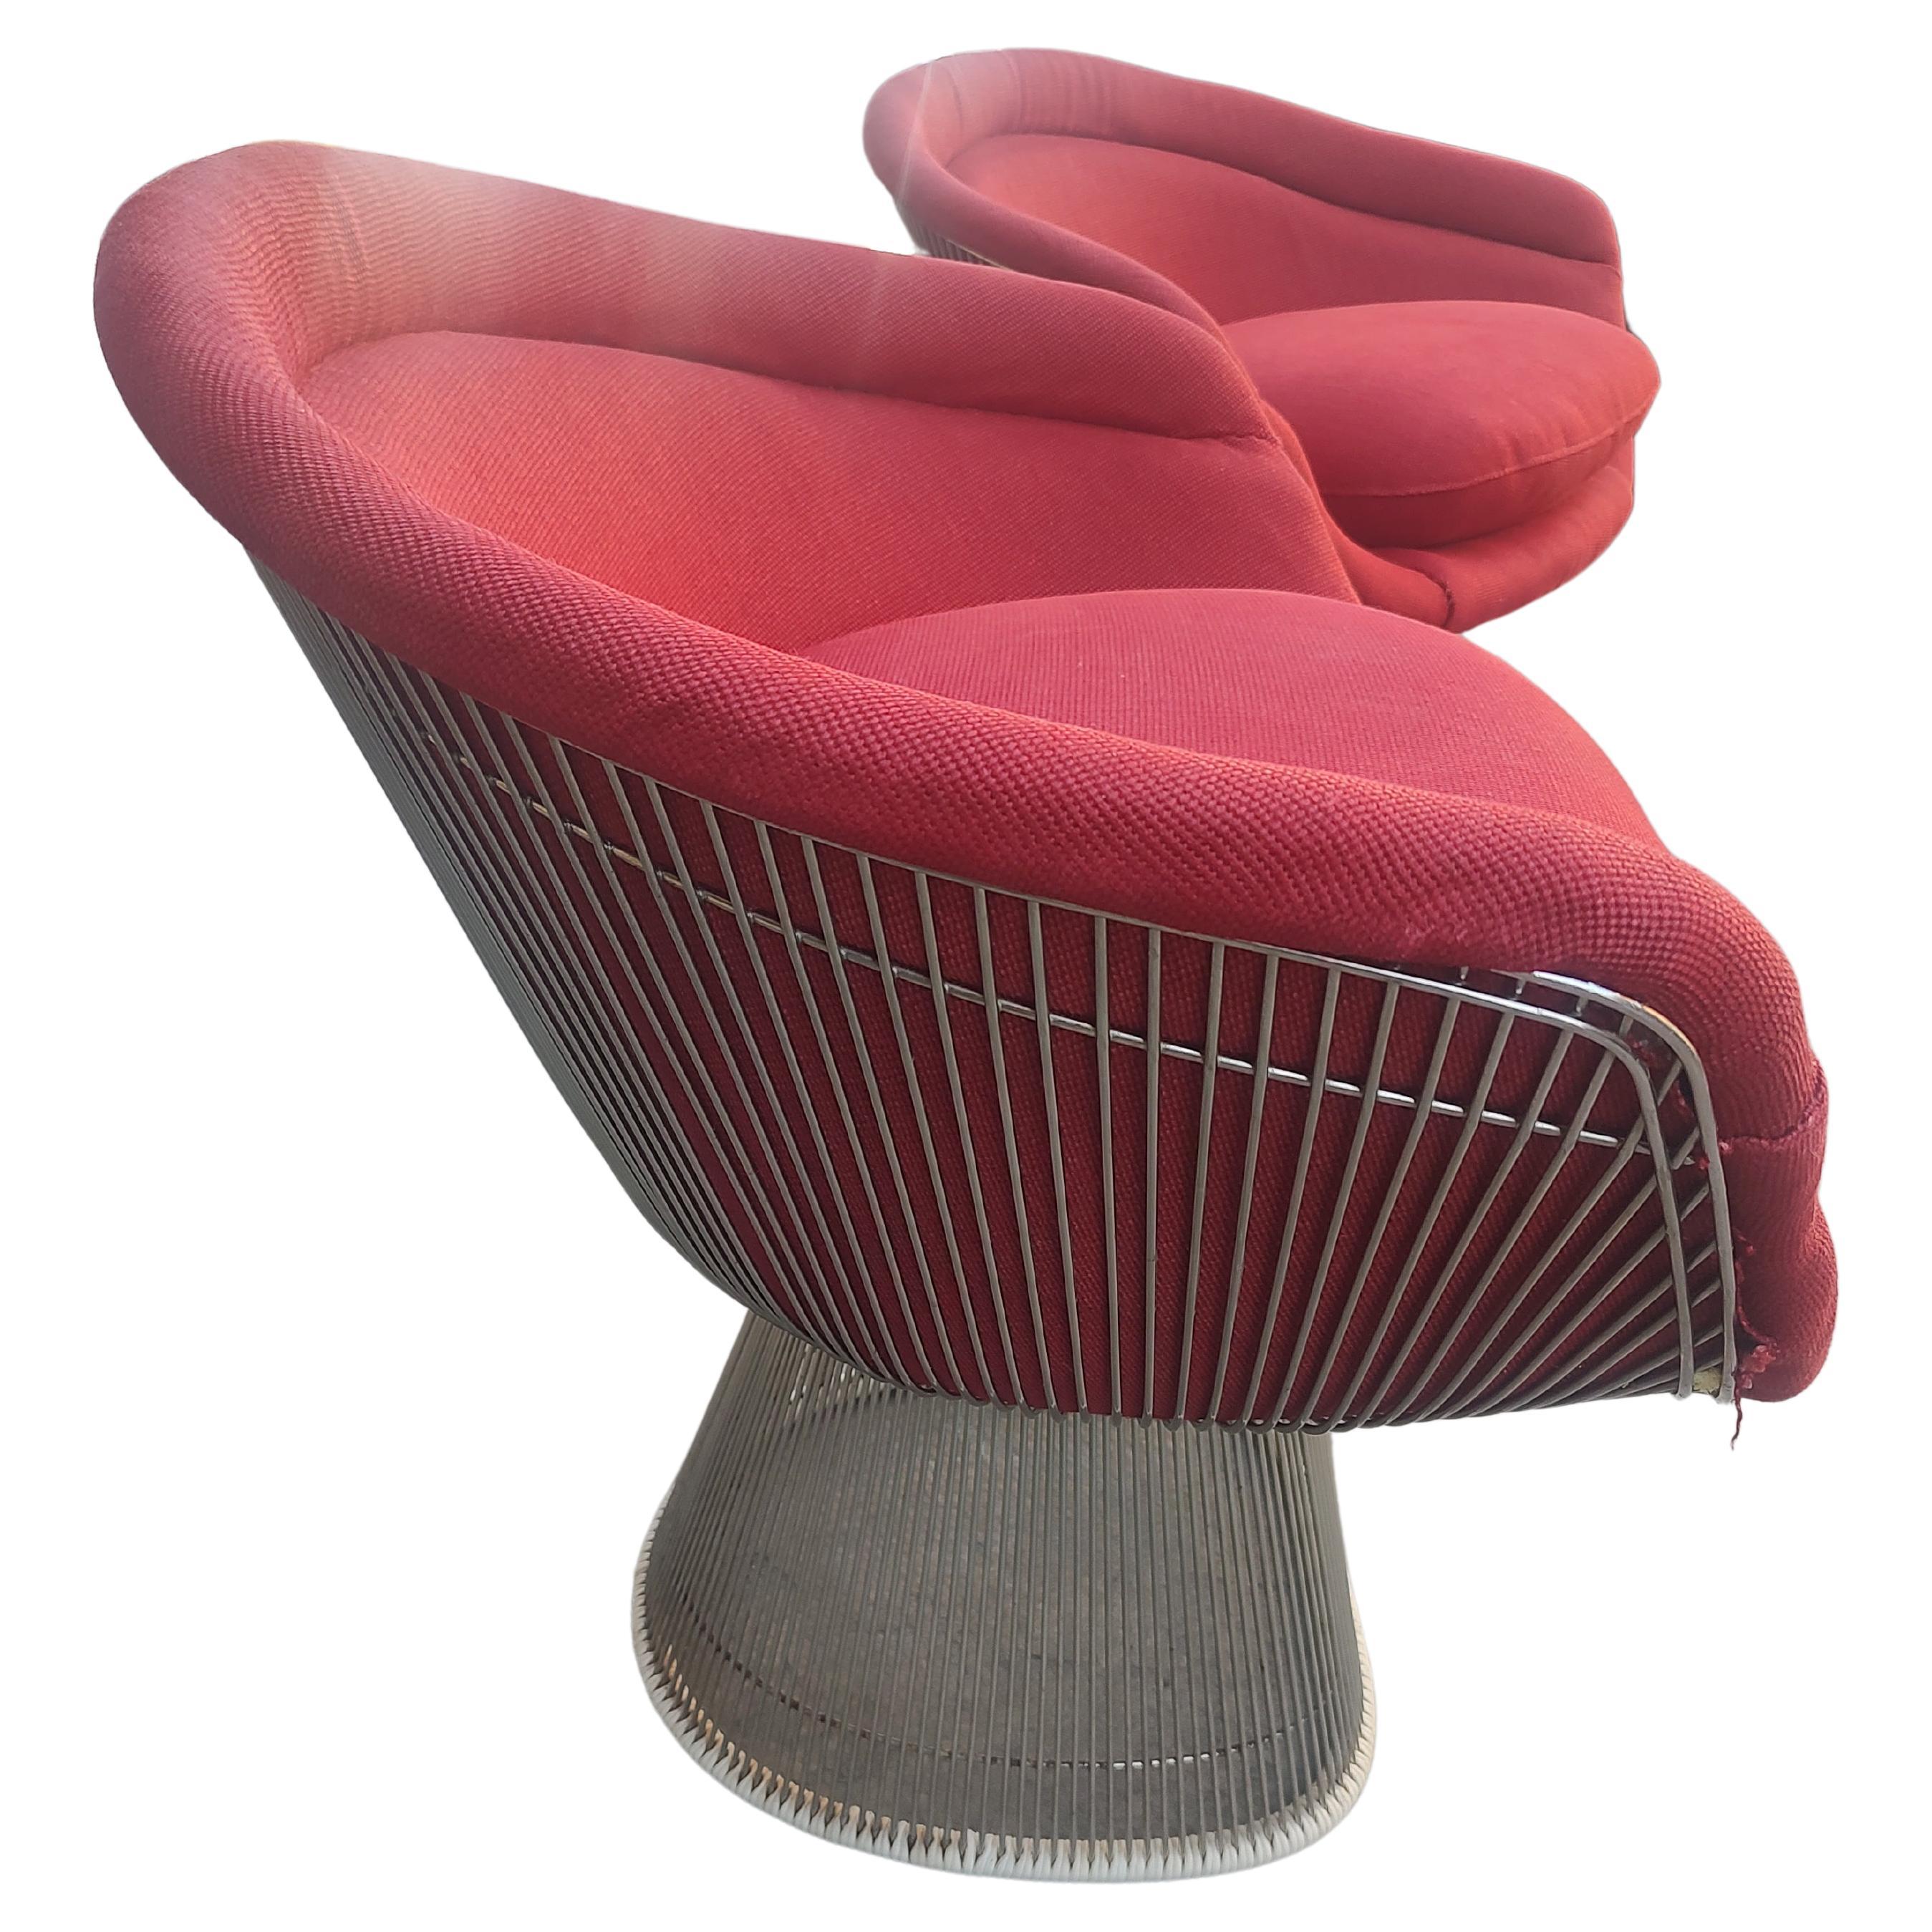 Pair of Warren Platner Mid Century Modern Lounge Chairs for Knoll C1965 In Good Condition For Sale In Port Jervis, NY